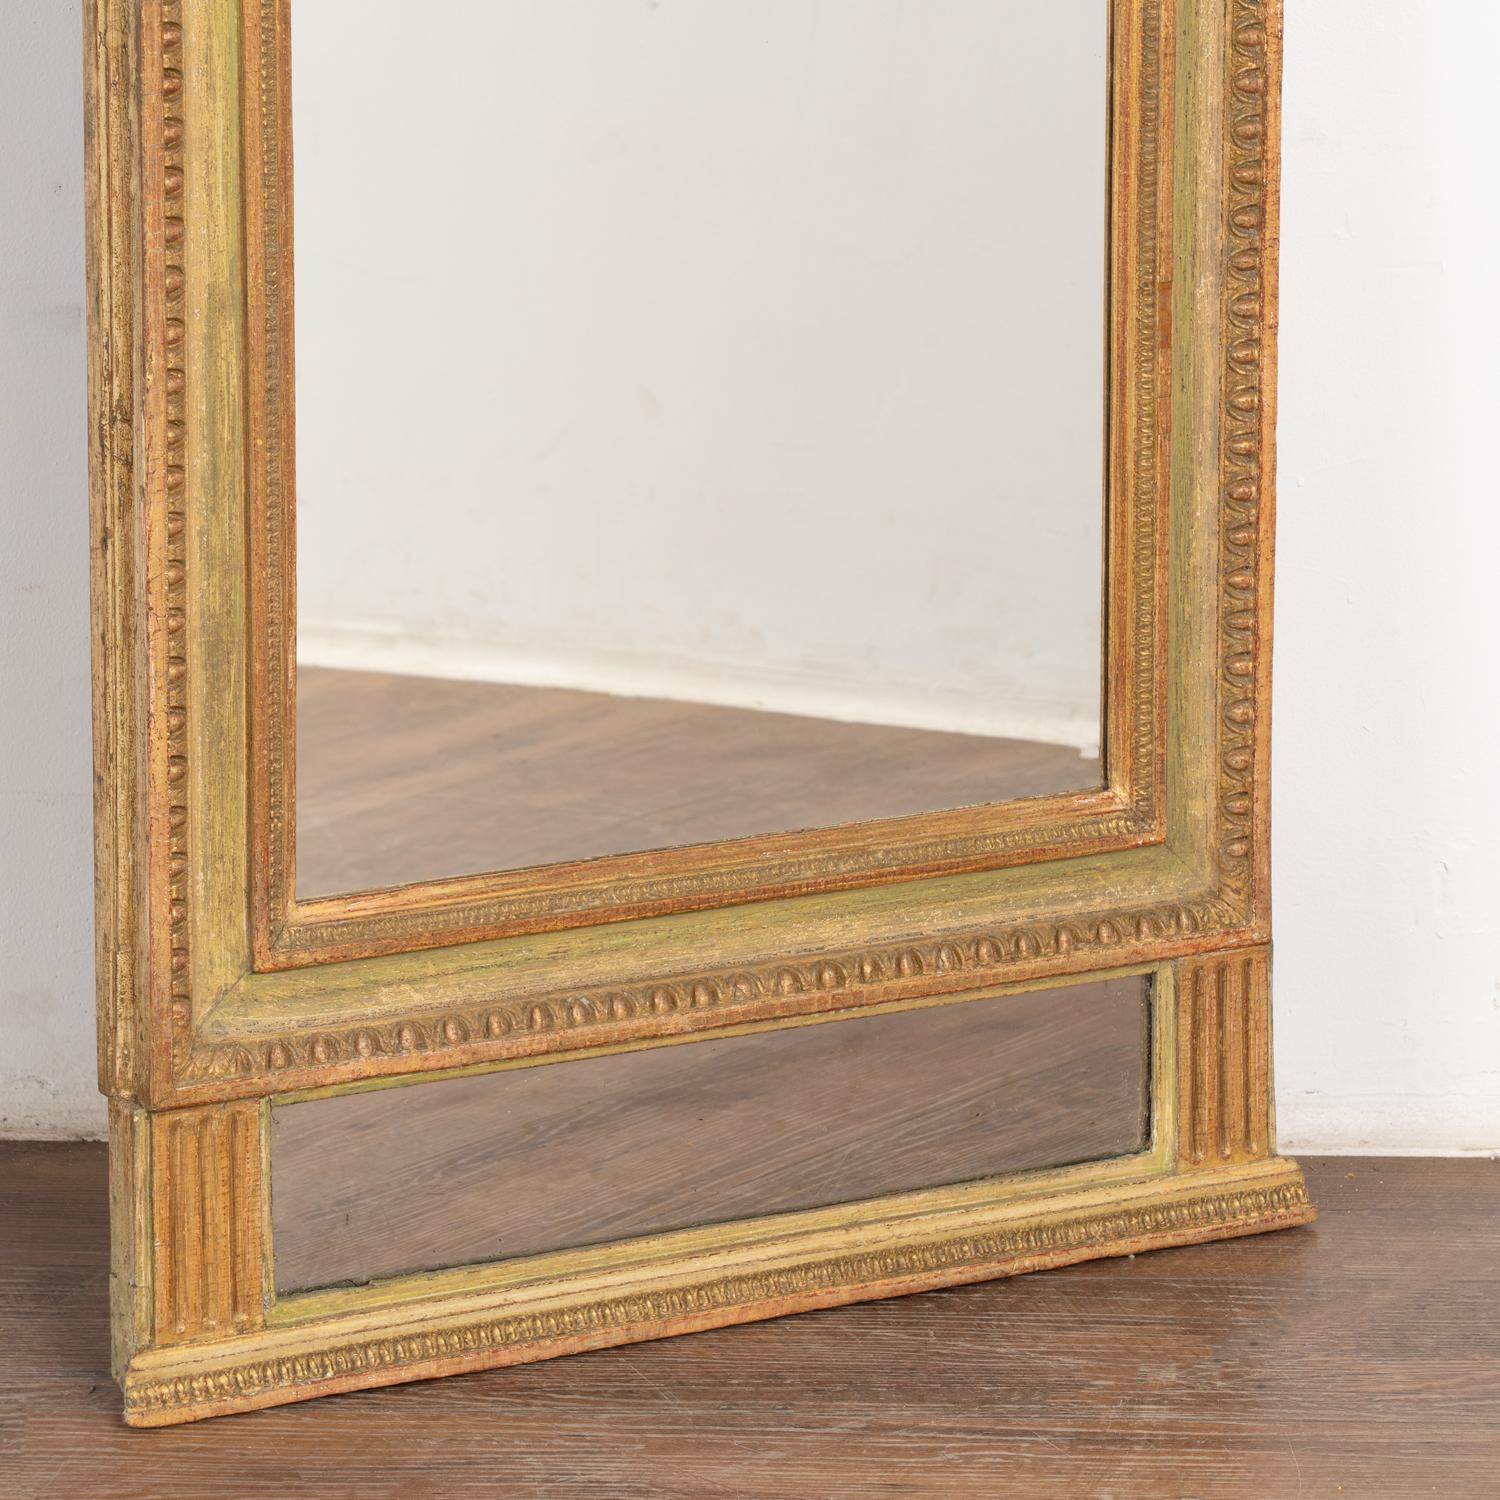 Gold and Green Painted Trumeau Mirror, Sweden circa 1820-40 For Sale 4